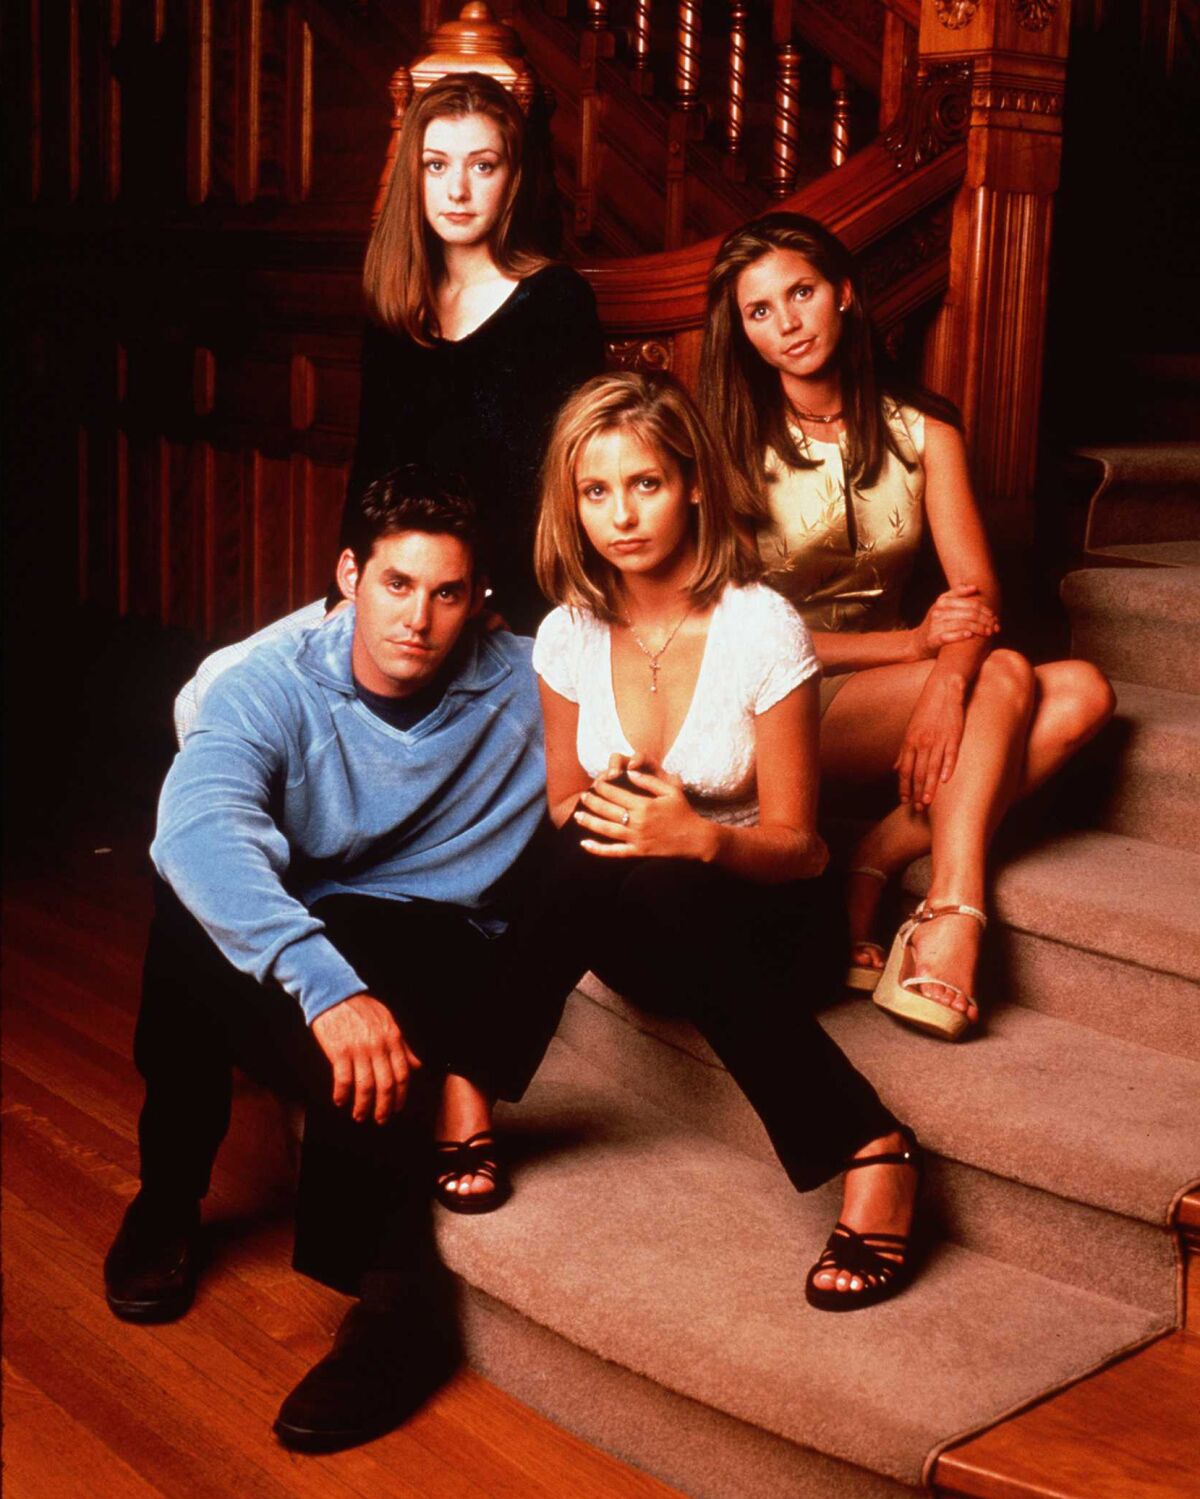 Four cast members of 'Buffy the Vampire Slayer' pose at the foot of a staircase